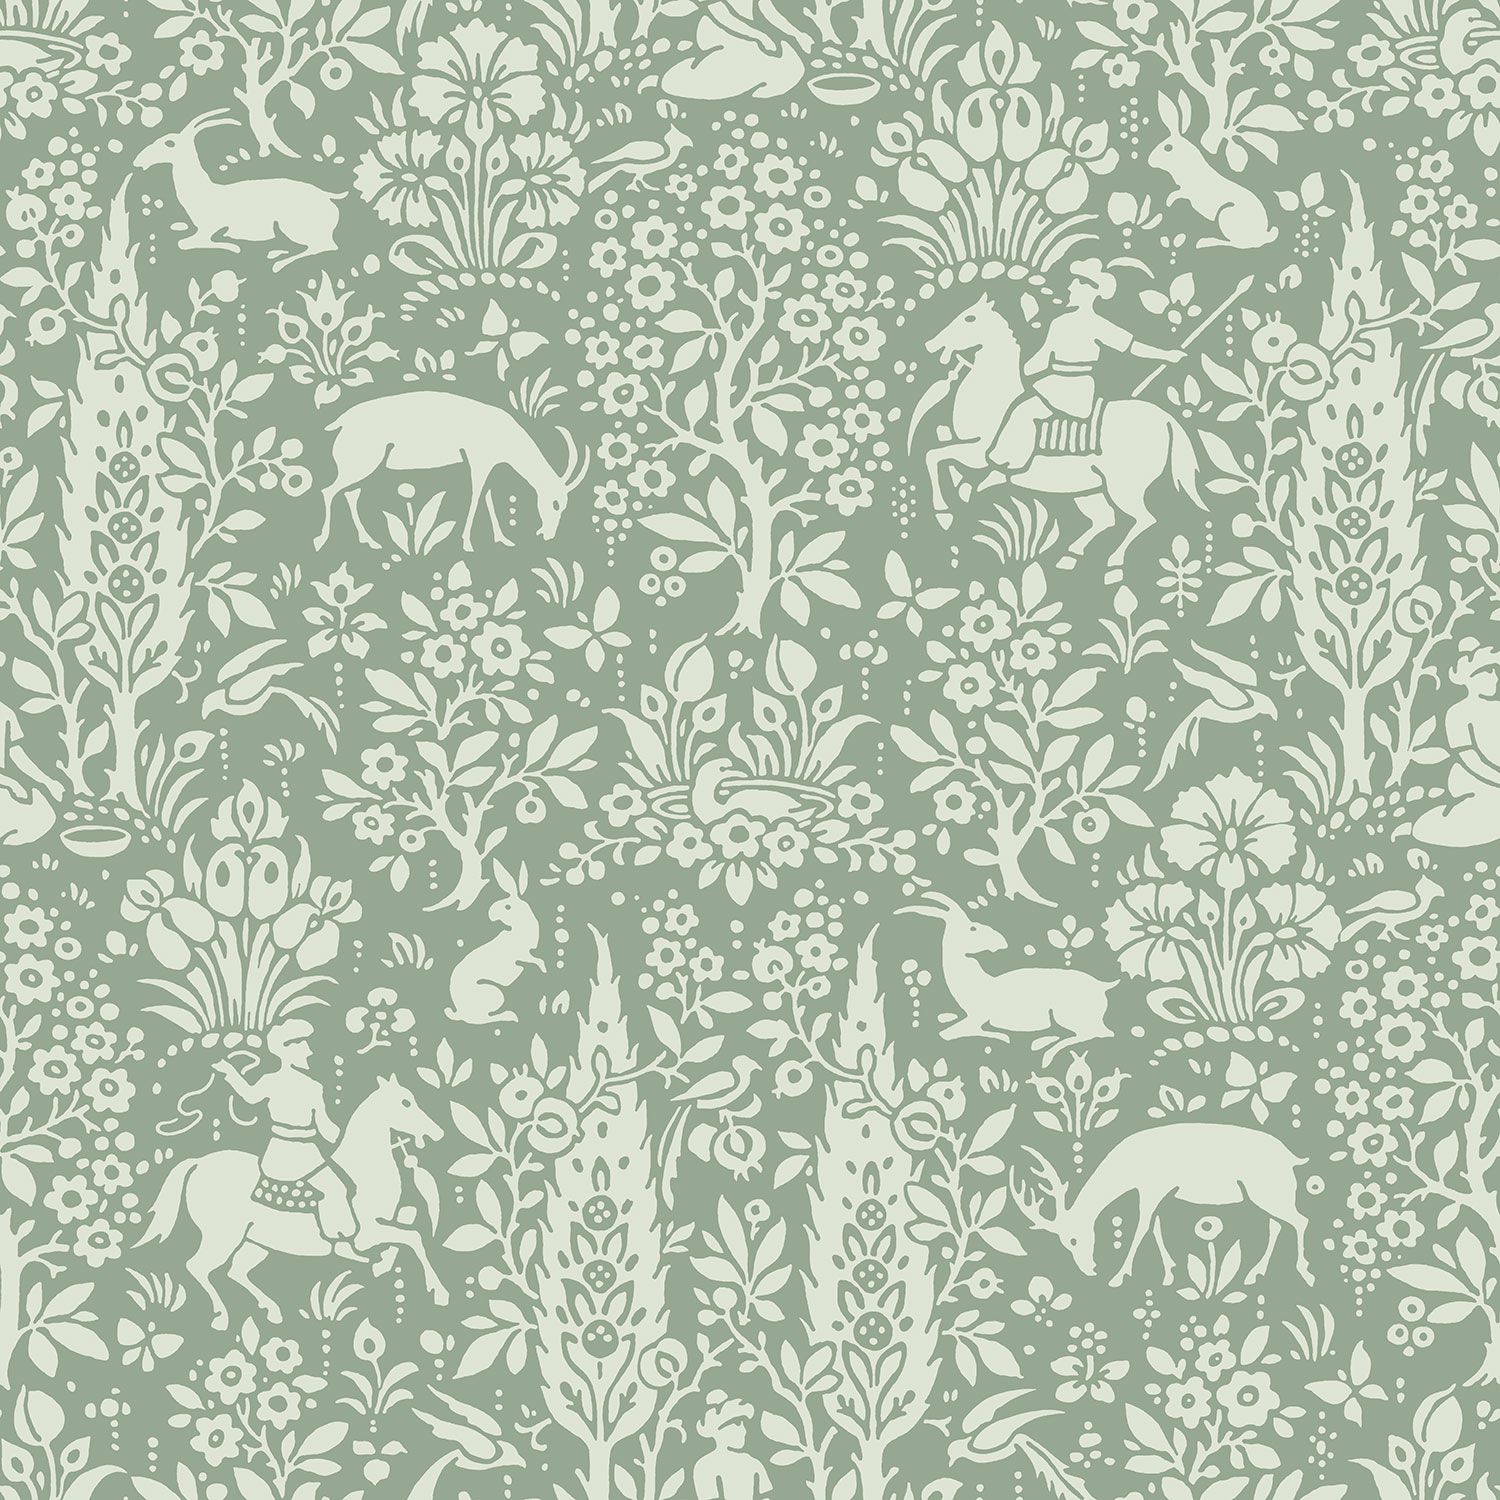 A green and white pattern with animals - Sage green